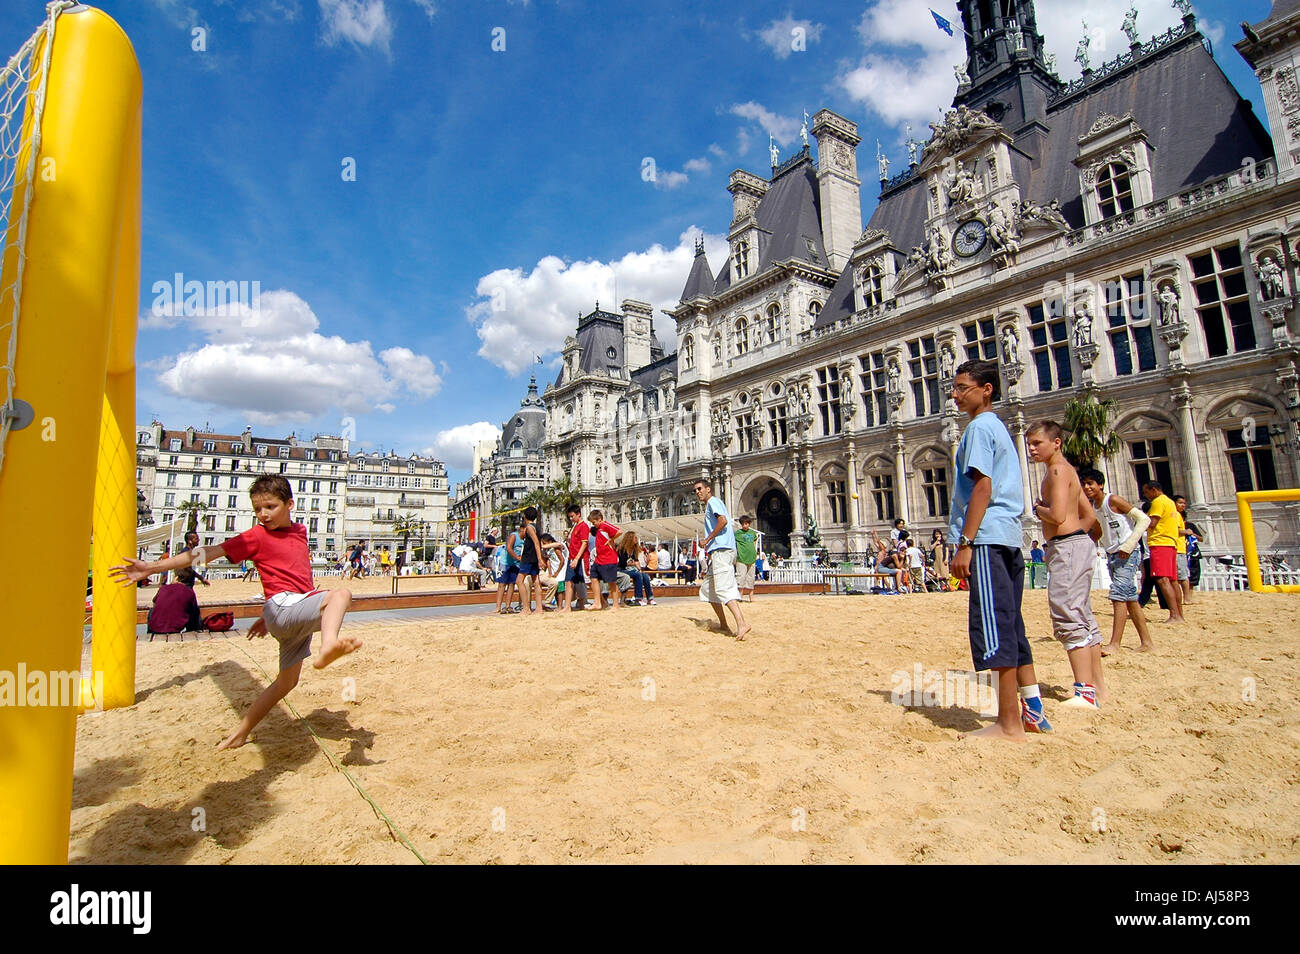 People playing beach soccer on an artificial field set up in front of City Hall during the Paris Plage event, Paris, France. Stock Photo